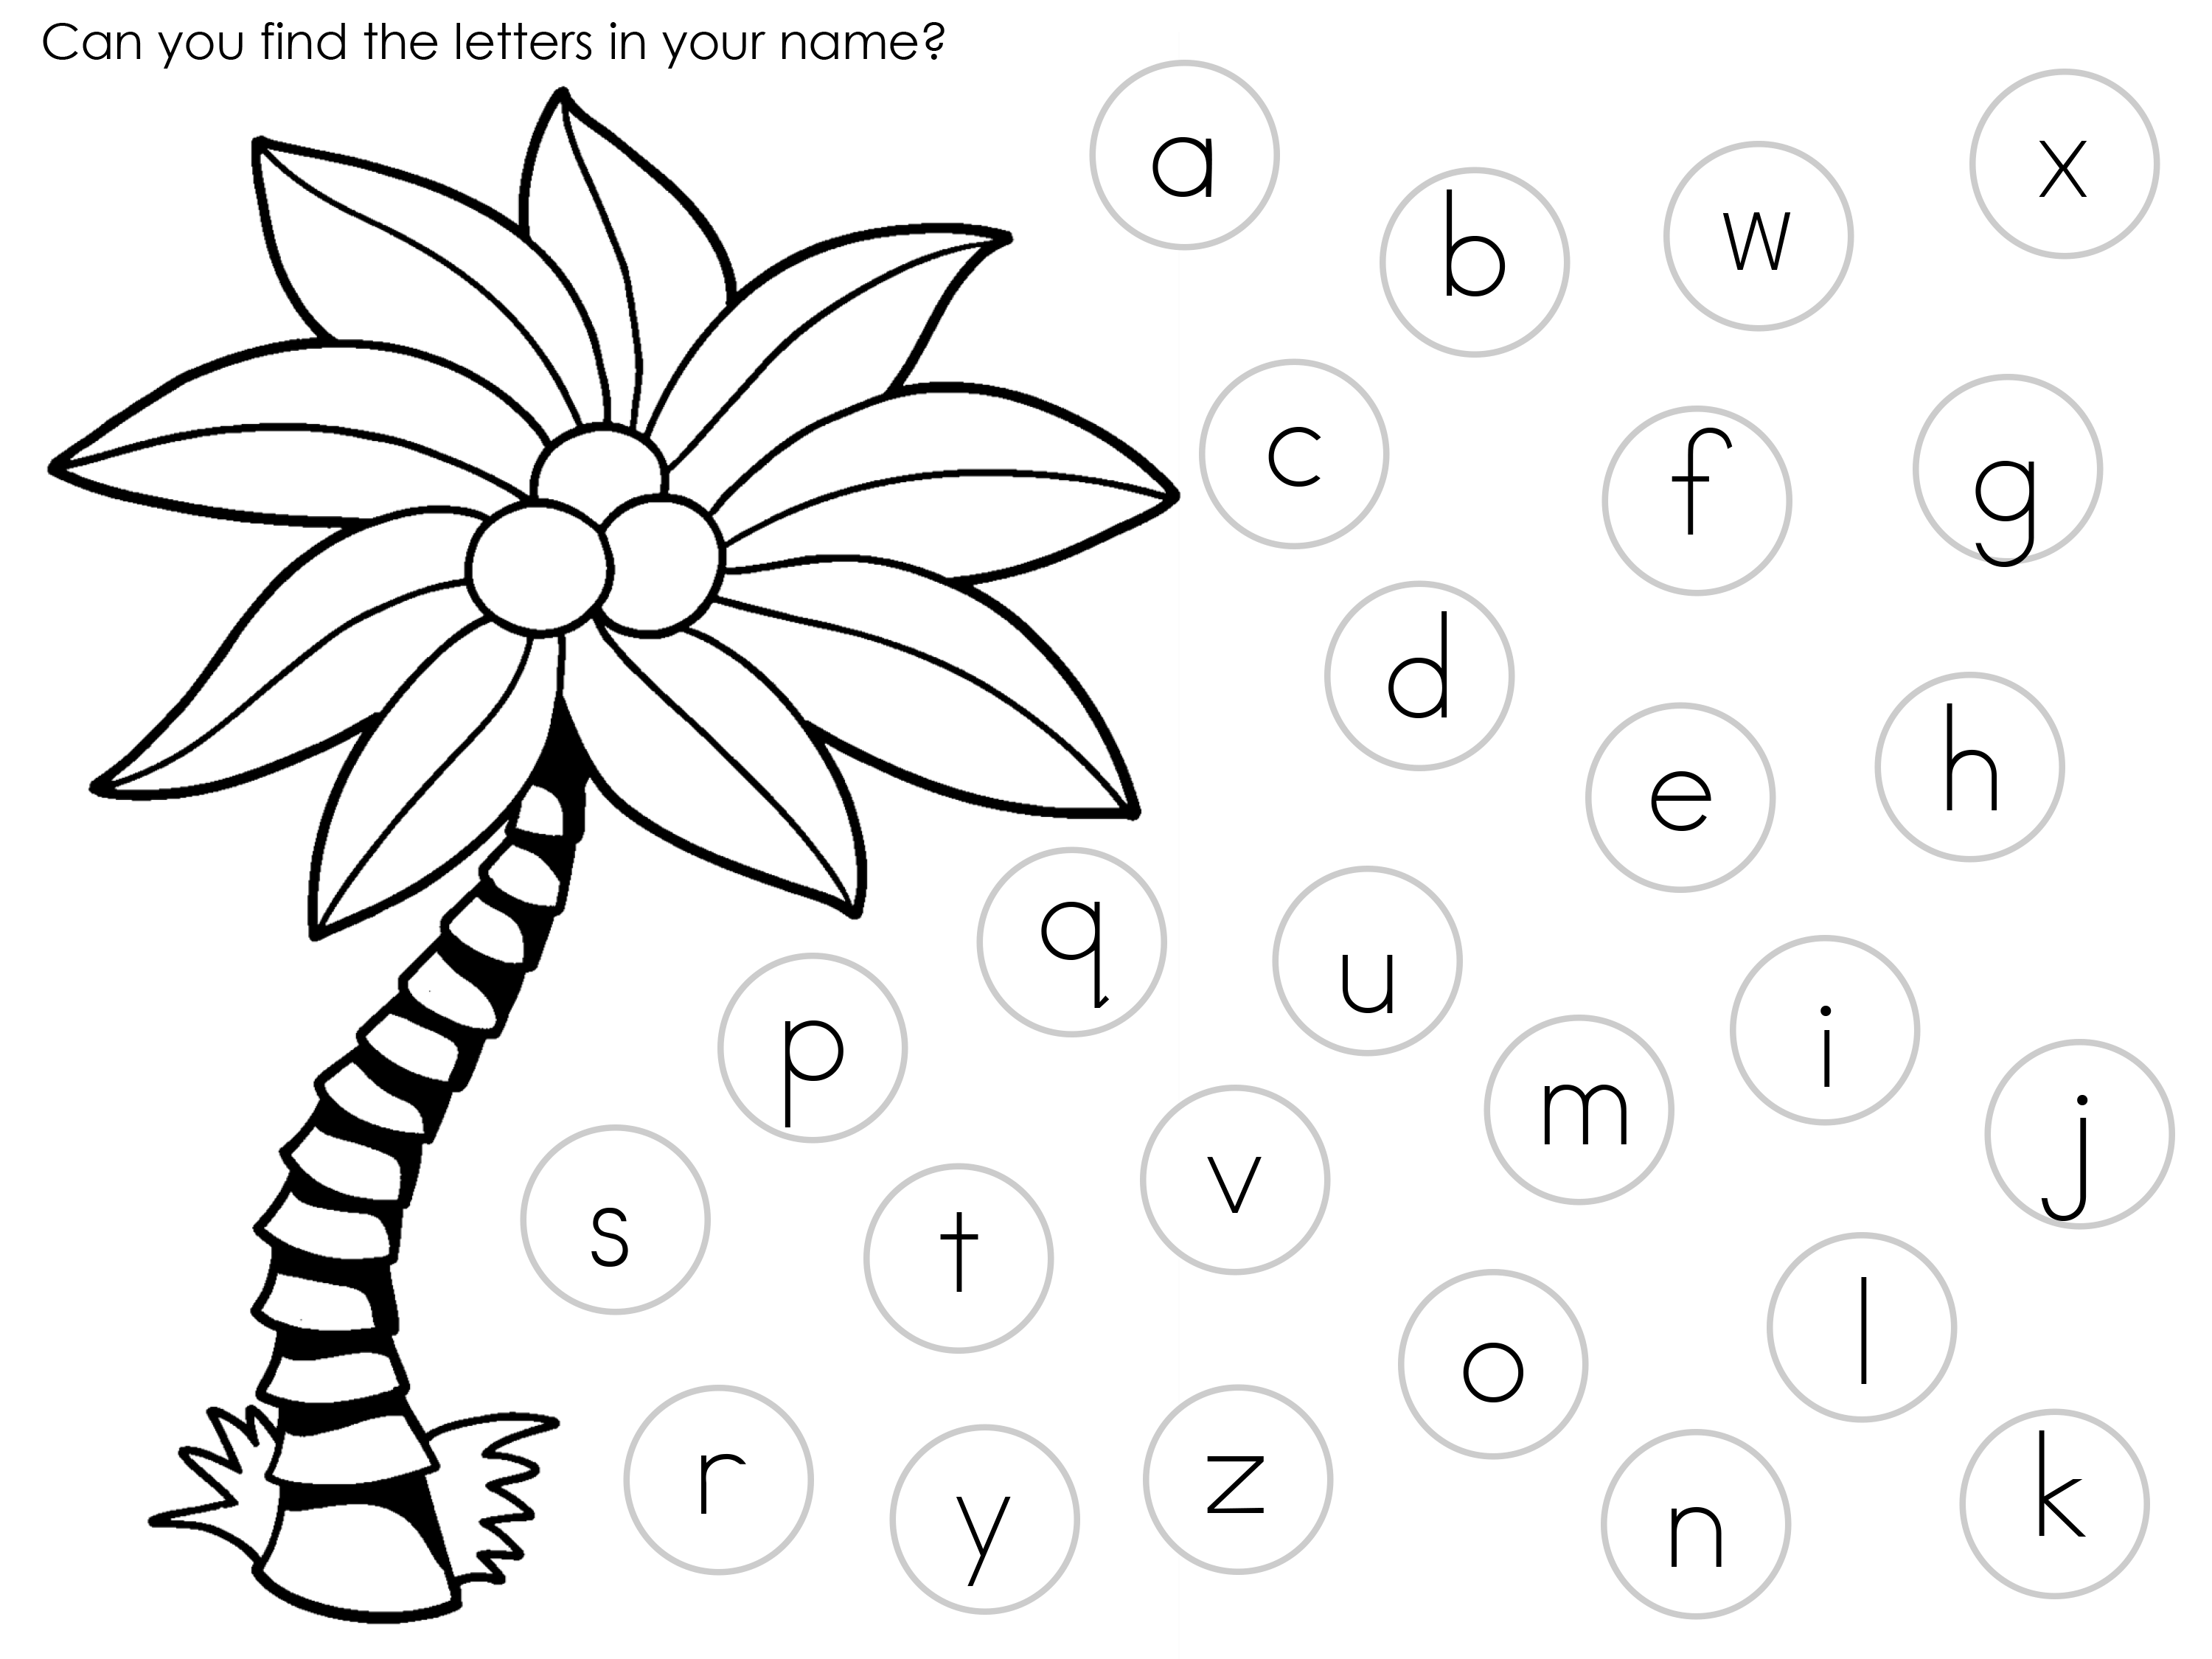 free-chicka-chicka-boom-boom-coloring-pages-download-free-chicka-chicka-boom-boom-coloring